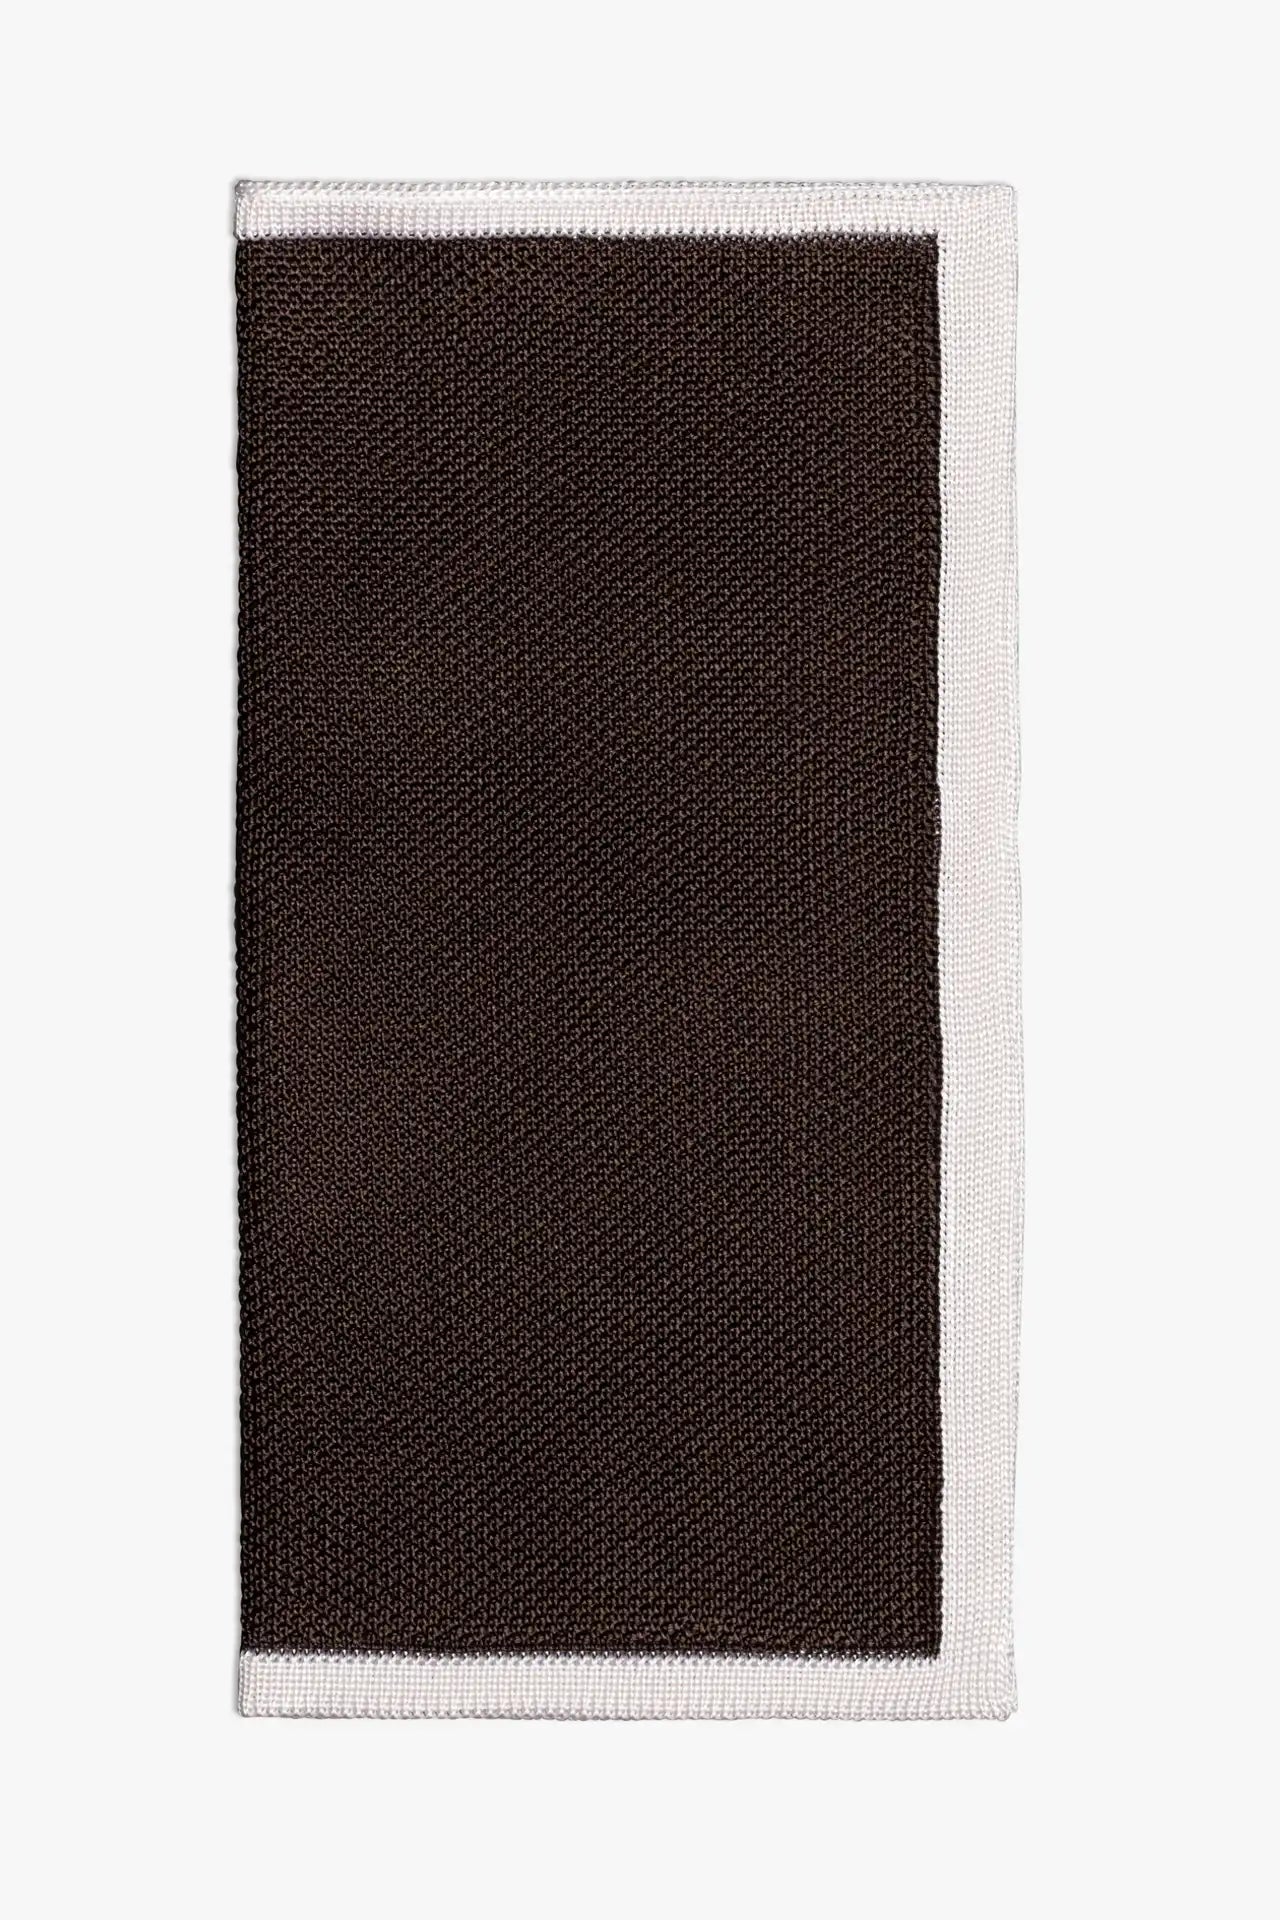 Brown knitted pocket square with white boarder. Made of silk in Italy.